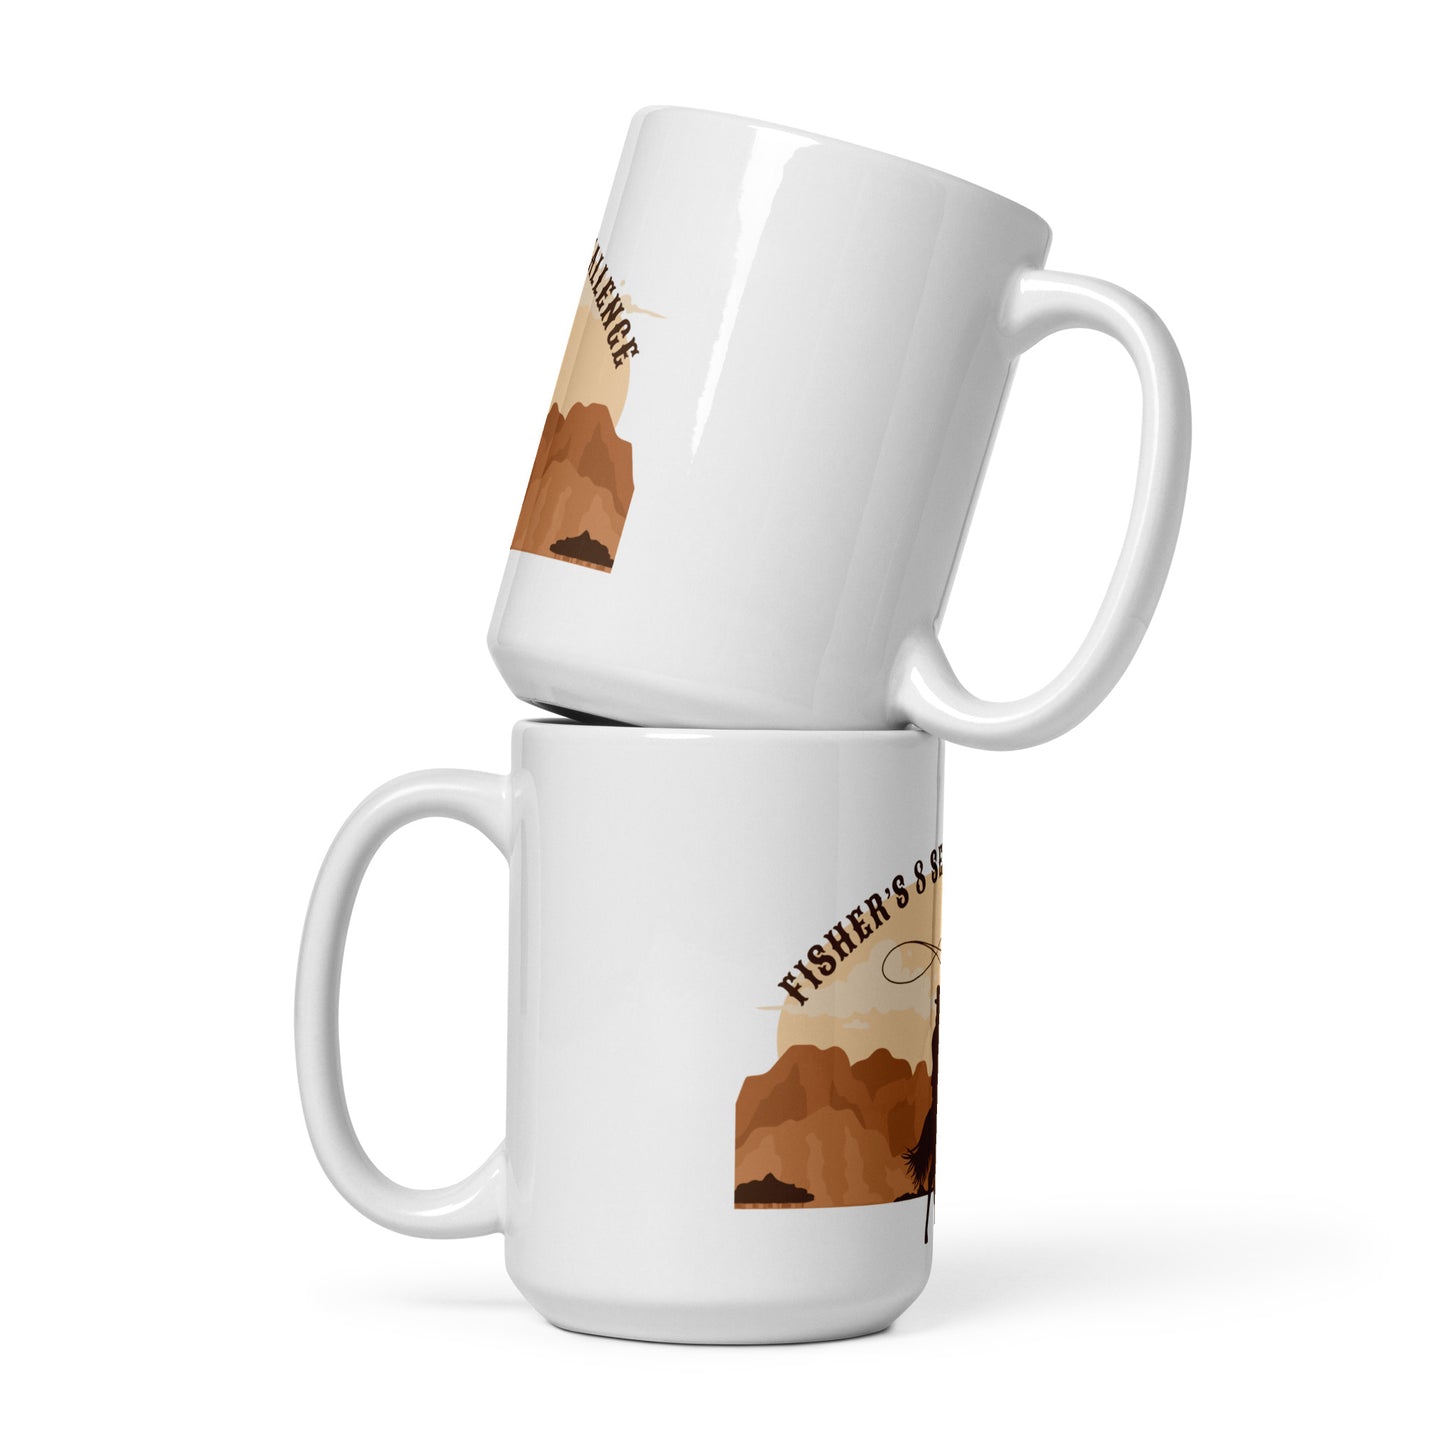 "Fisher's 8 Second Challenge" [Here With Me] Mug